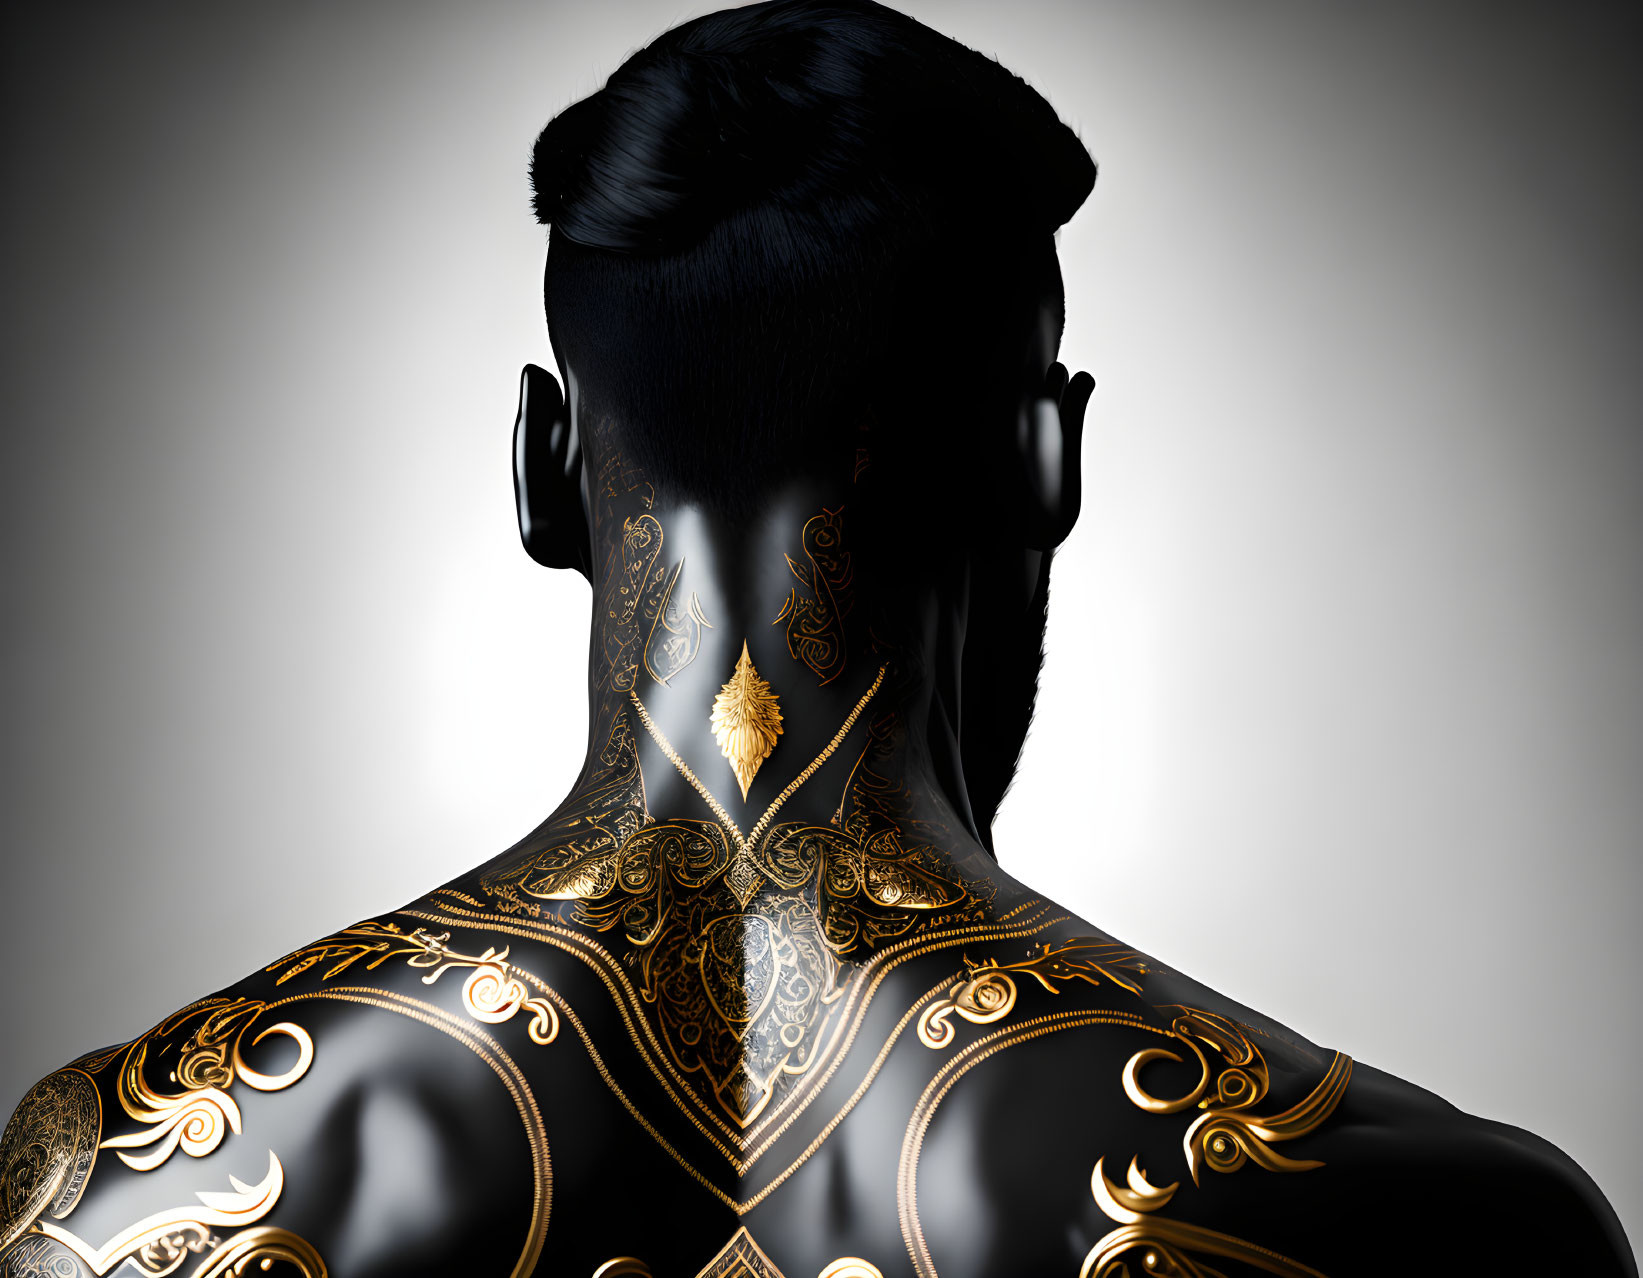 Intricate Golden Tattoo on Back and Neck with Bun Hairstyle